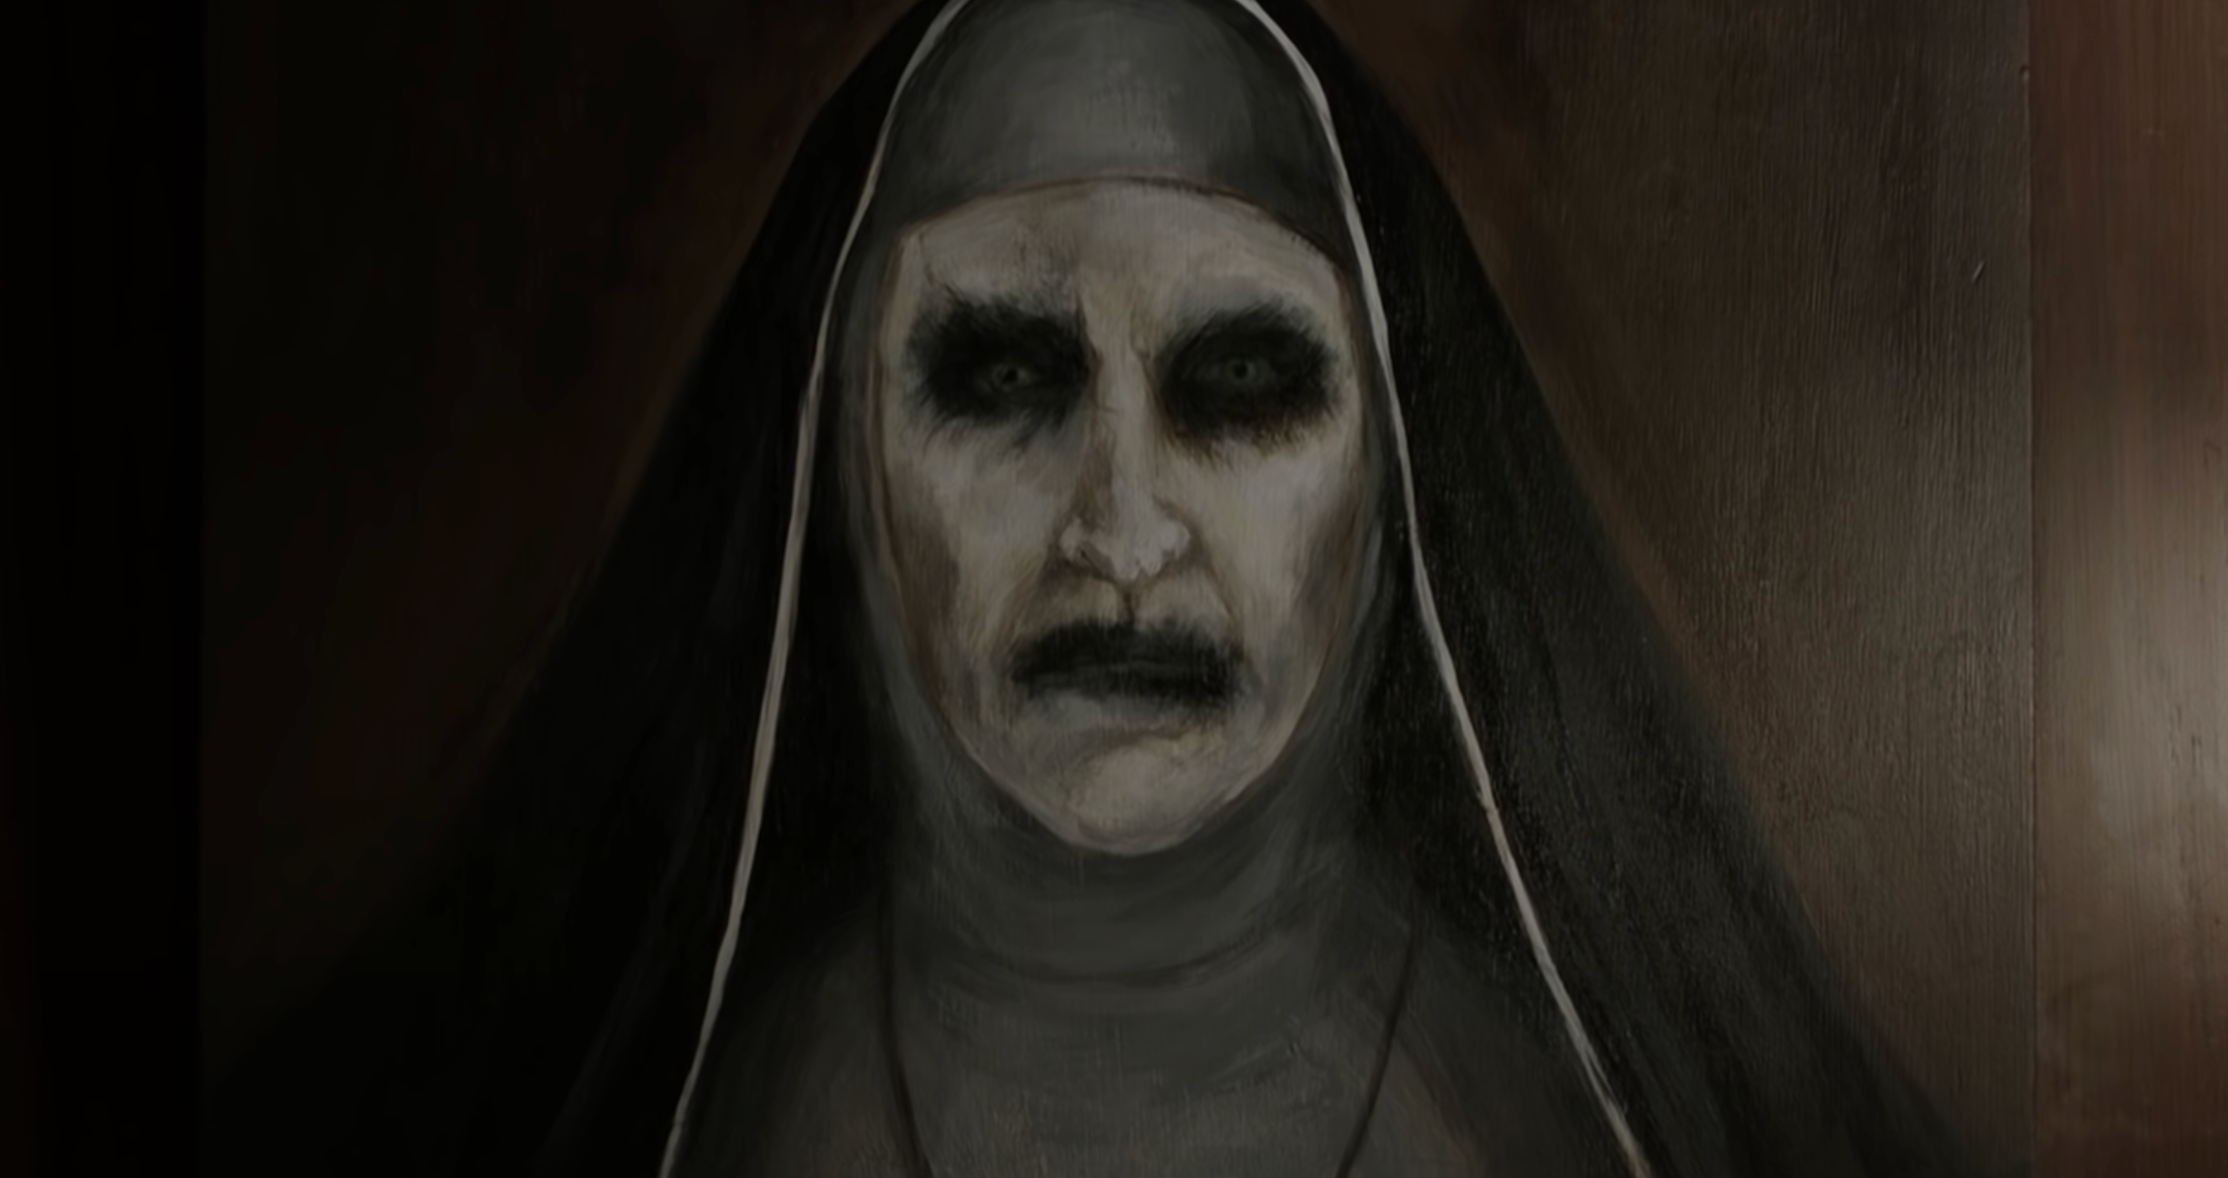 The Nun 2 Poster Previews New Conjuring Horror Movie